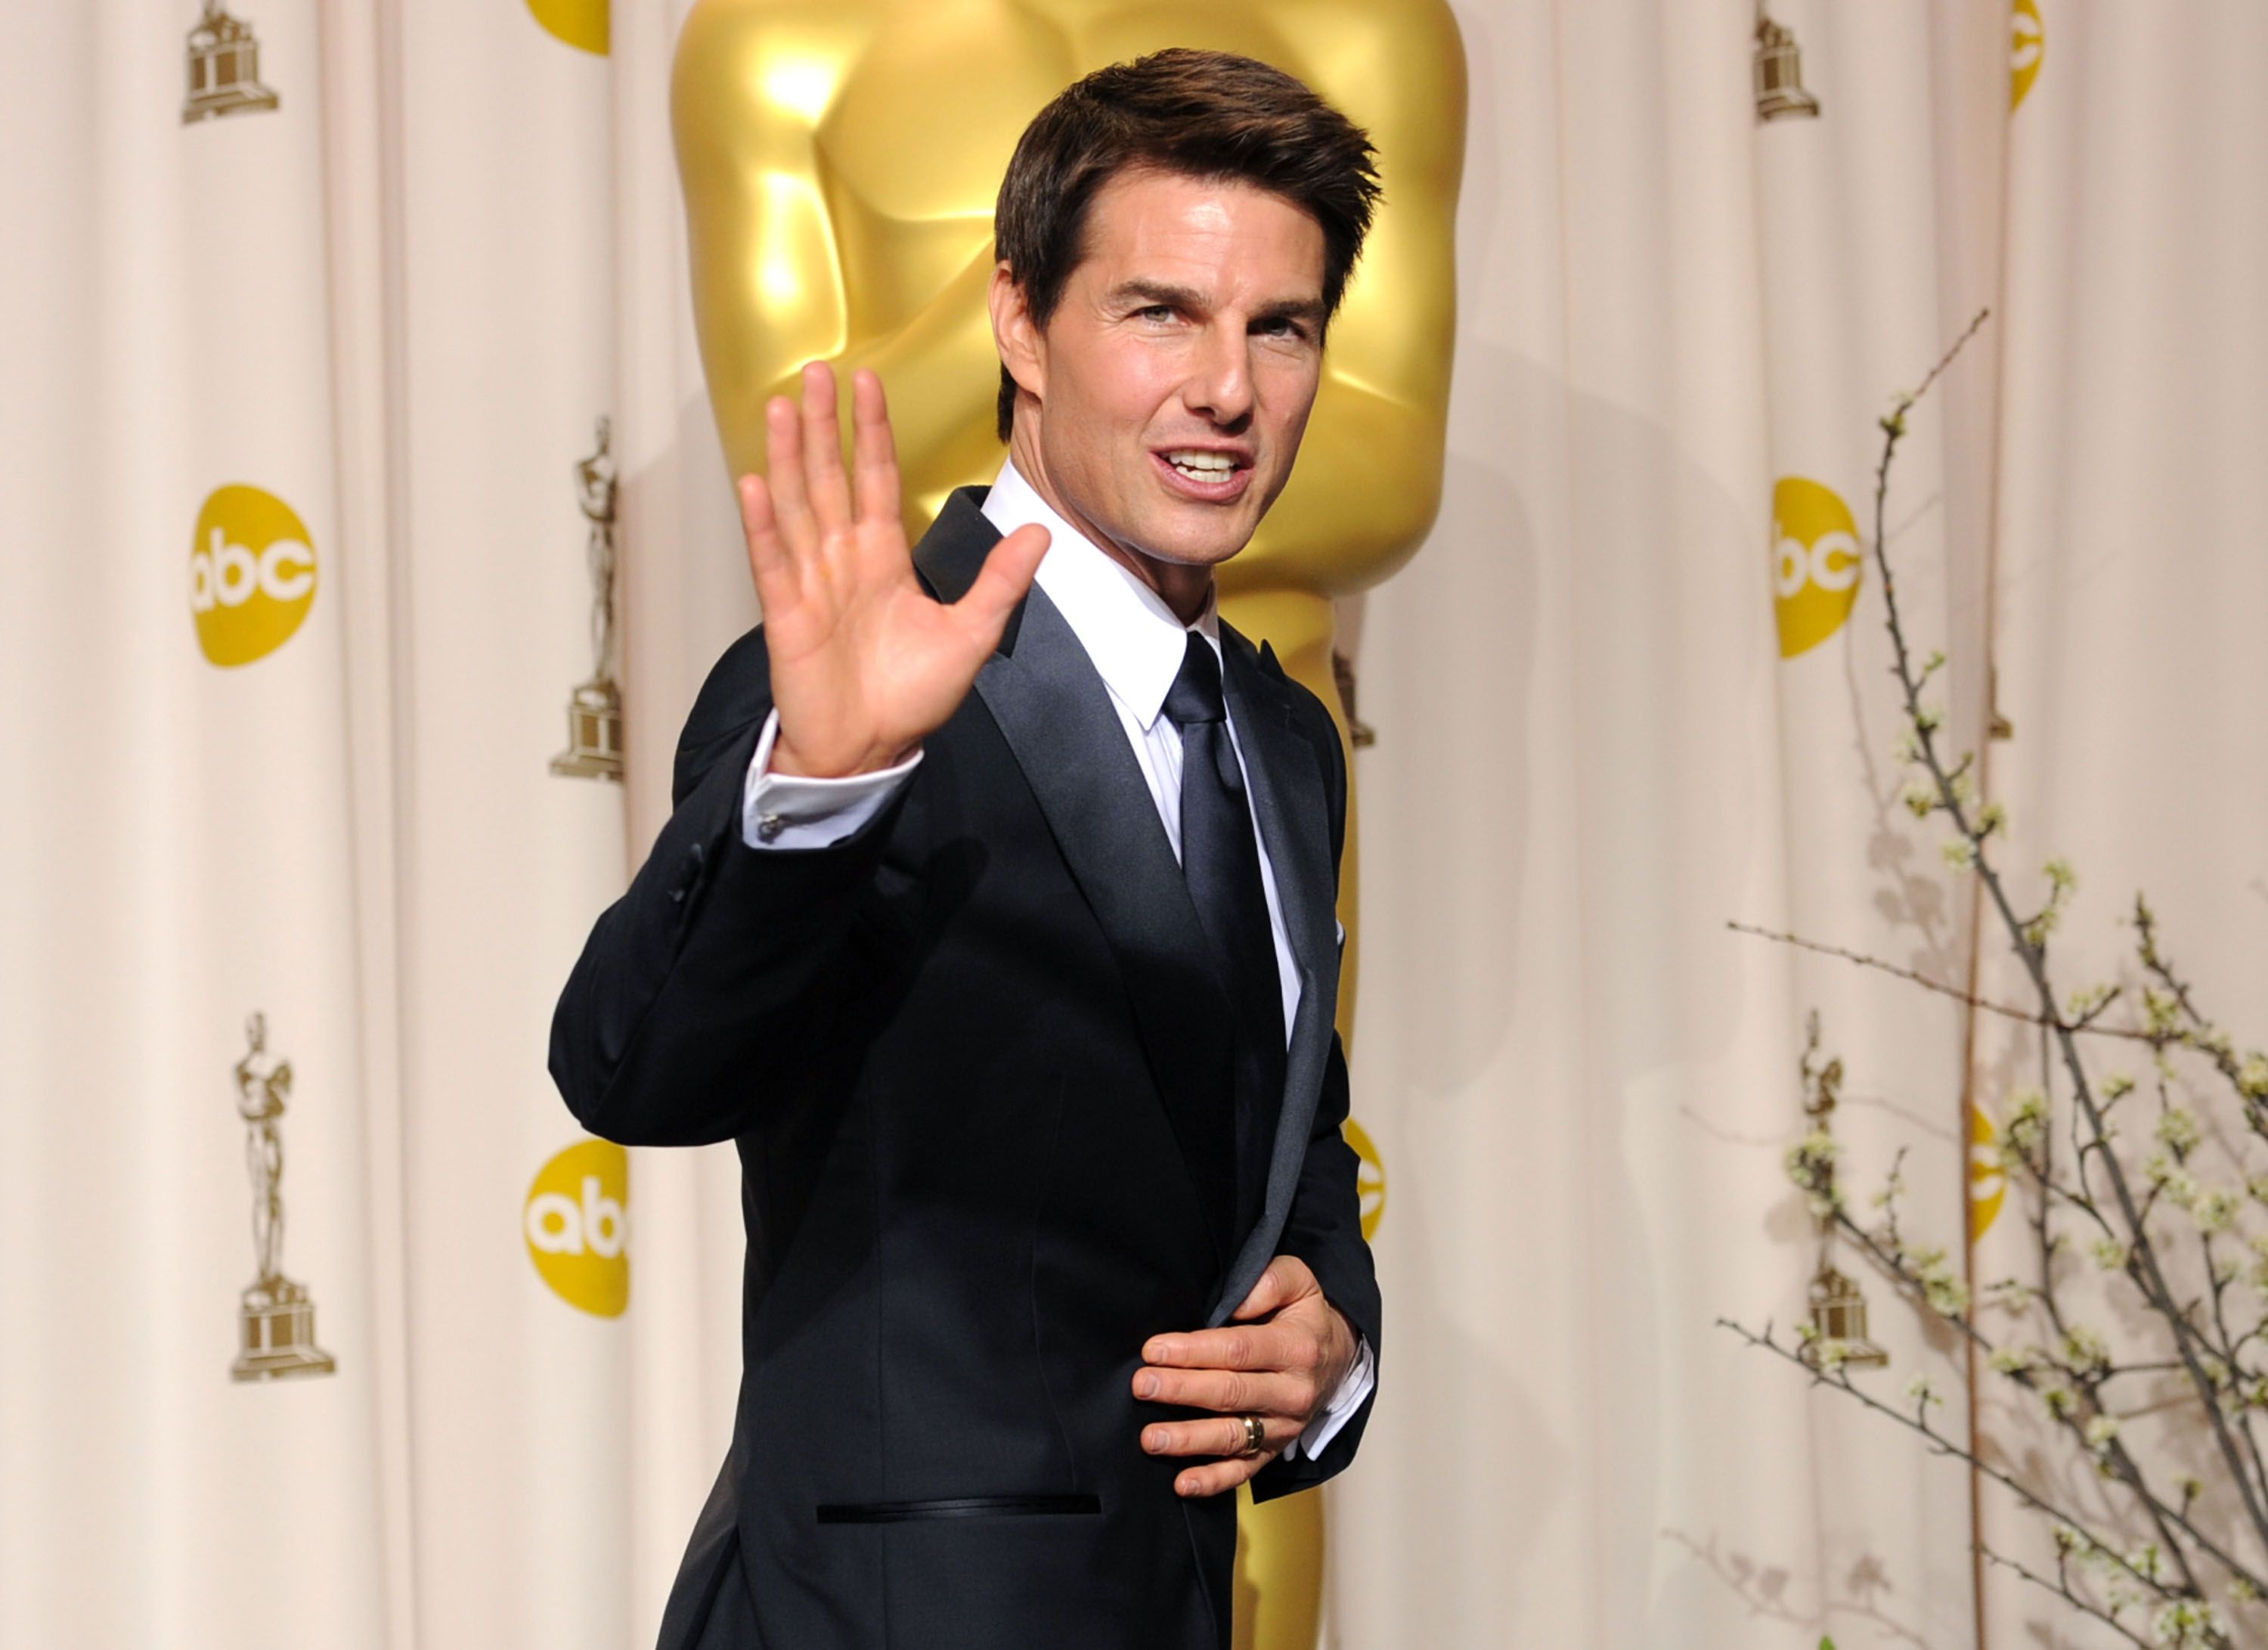 Tom Cruise at the 84th Annual Academy Awards held at the Hollywood & Highland Center on February 26, 2012 | Photo: Getty Images